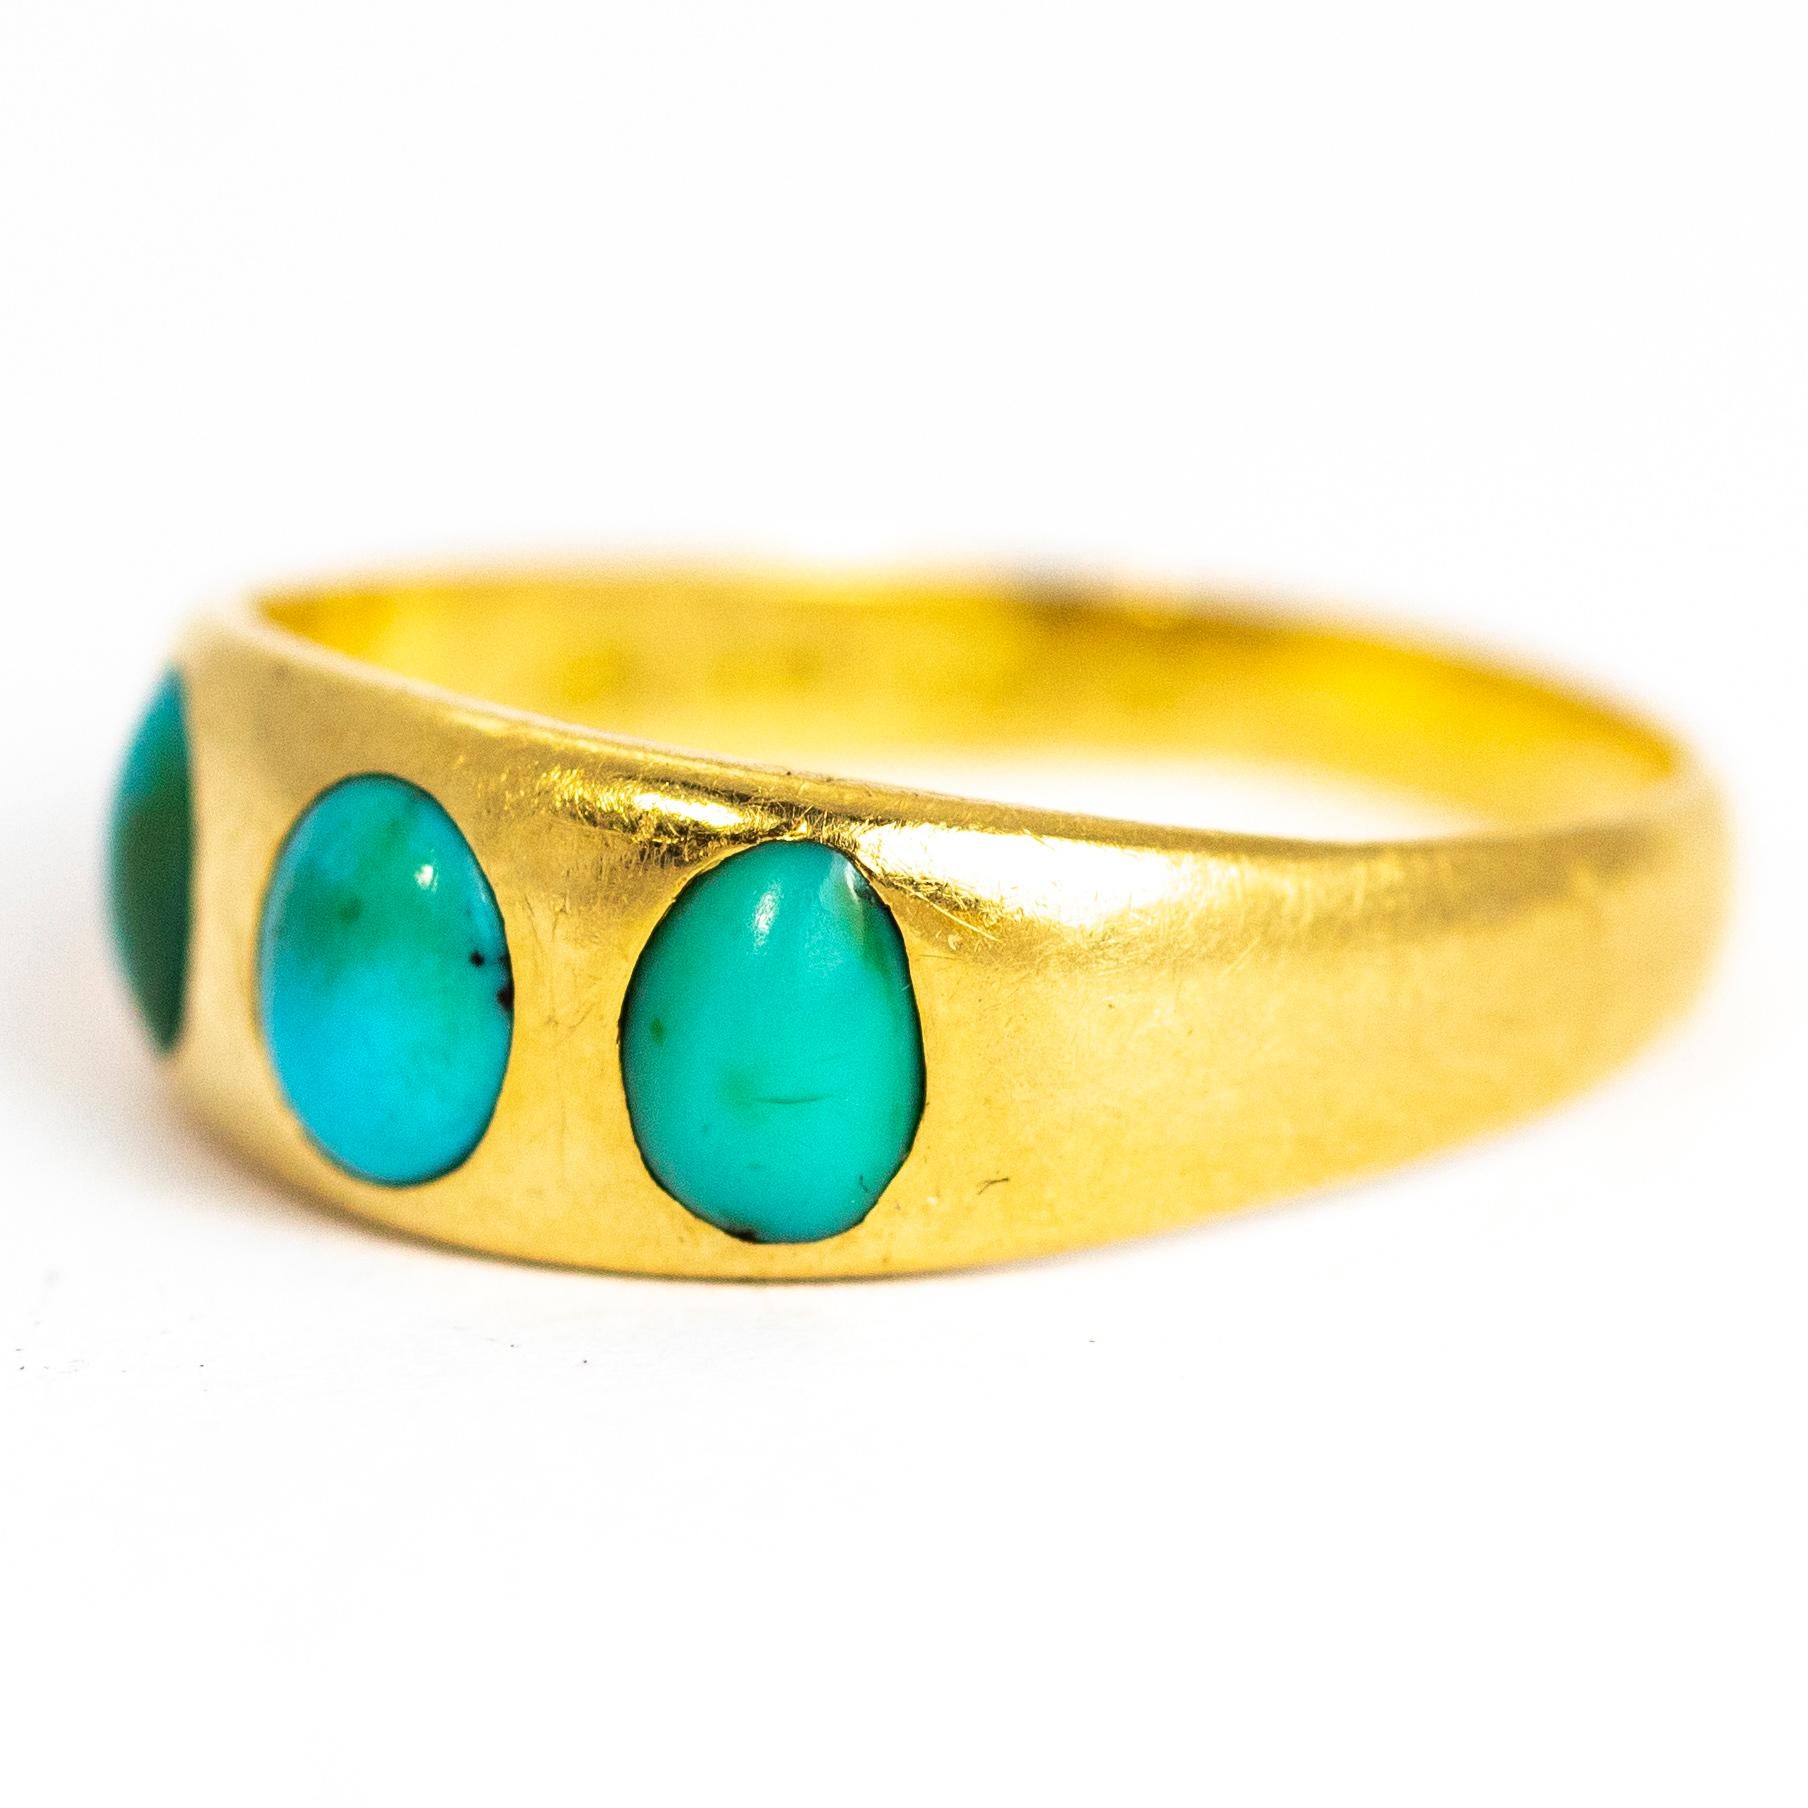 Classic three stone turquoise and gold band. The three turquoise stones are nice and bright blue and set flush within the glossy 18ct gold band. Made in Birmingham, England.

Ring Size: S or 9
Band Width: 7mm